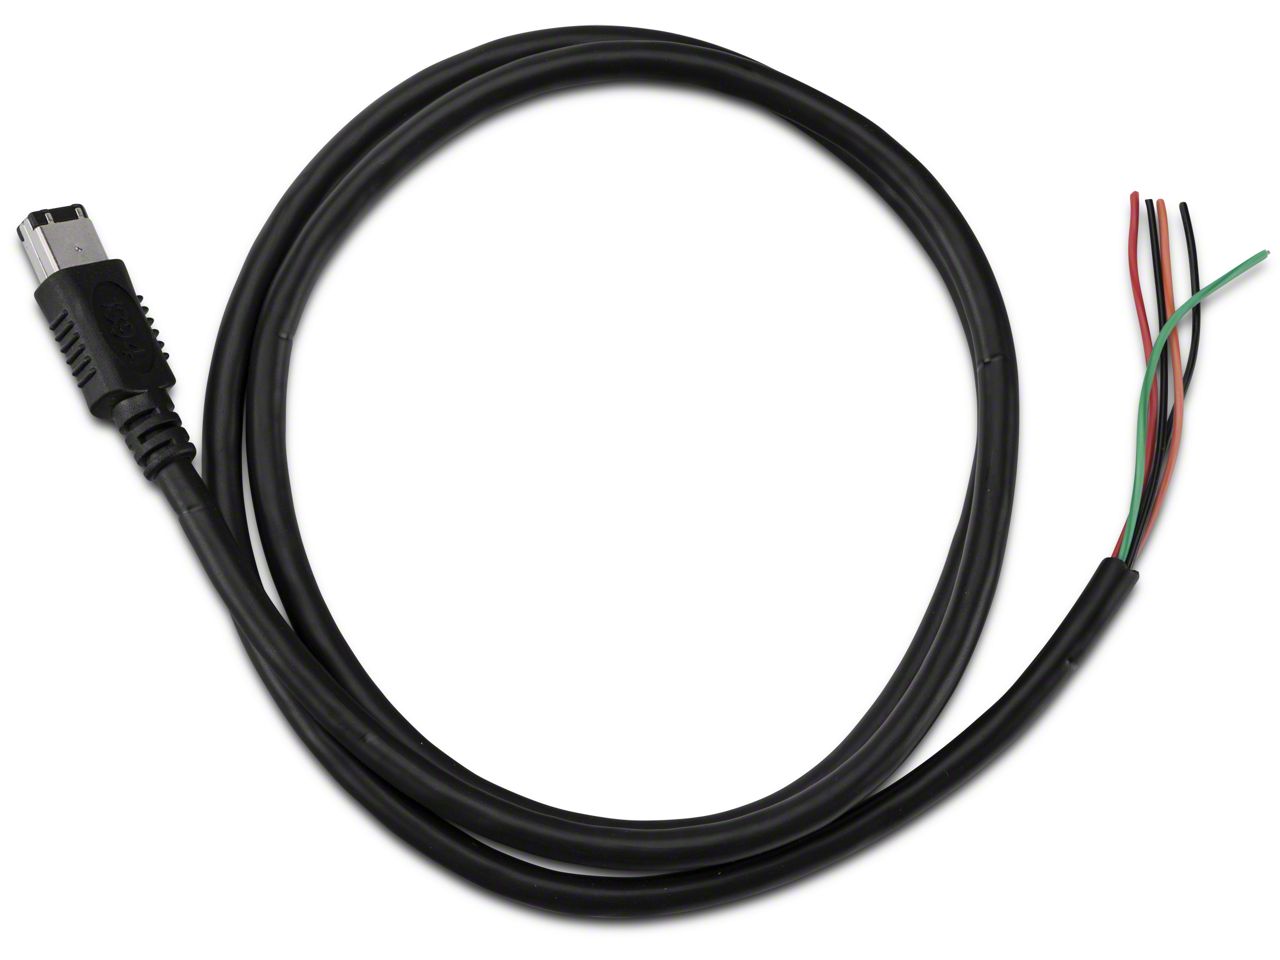 SCT 9608 2-Channel Analog Input Cable for SCT X3/SF3/Livewire/TS Applications